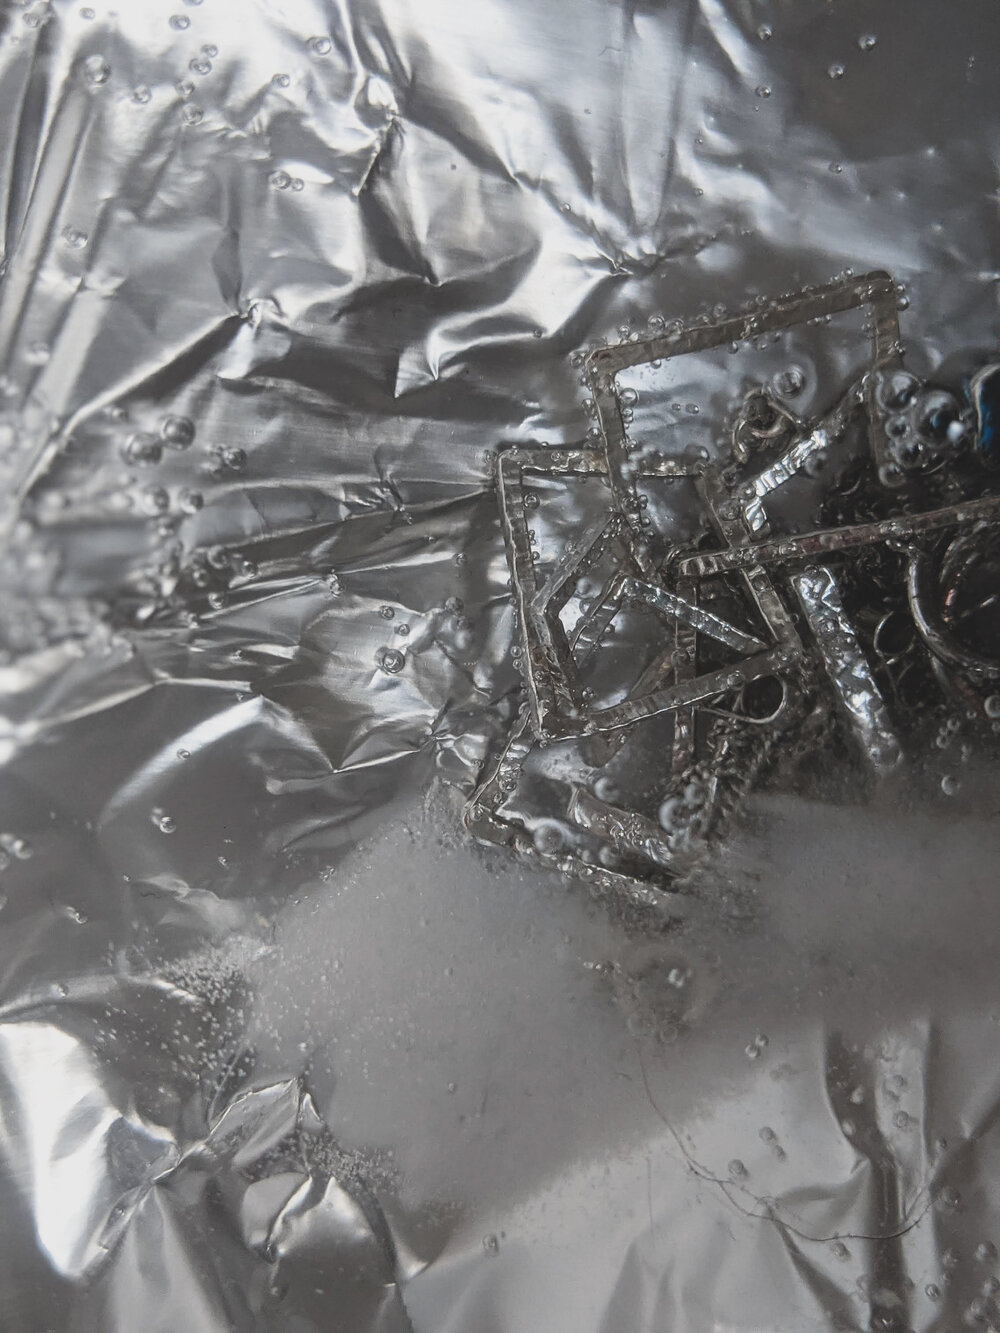 Clean jewellery in tinfoil and salt baking soda mixture